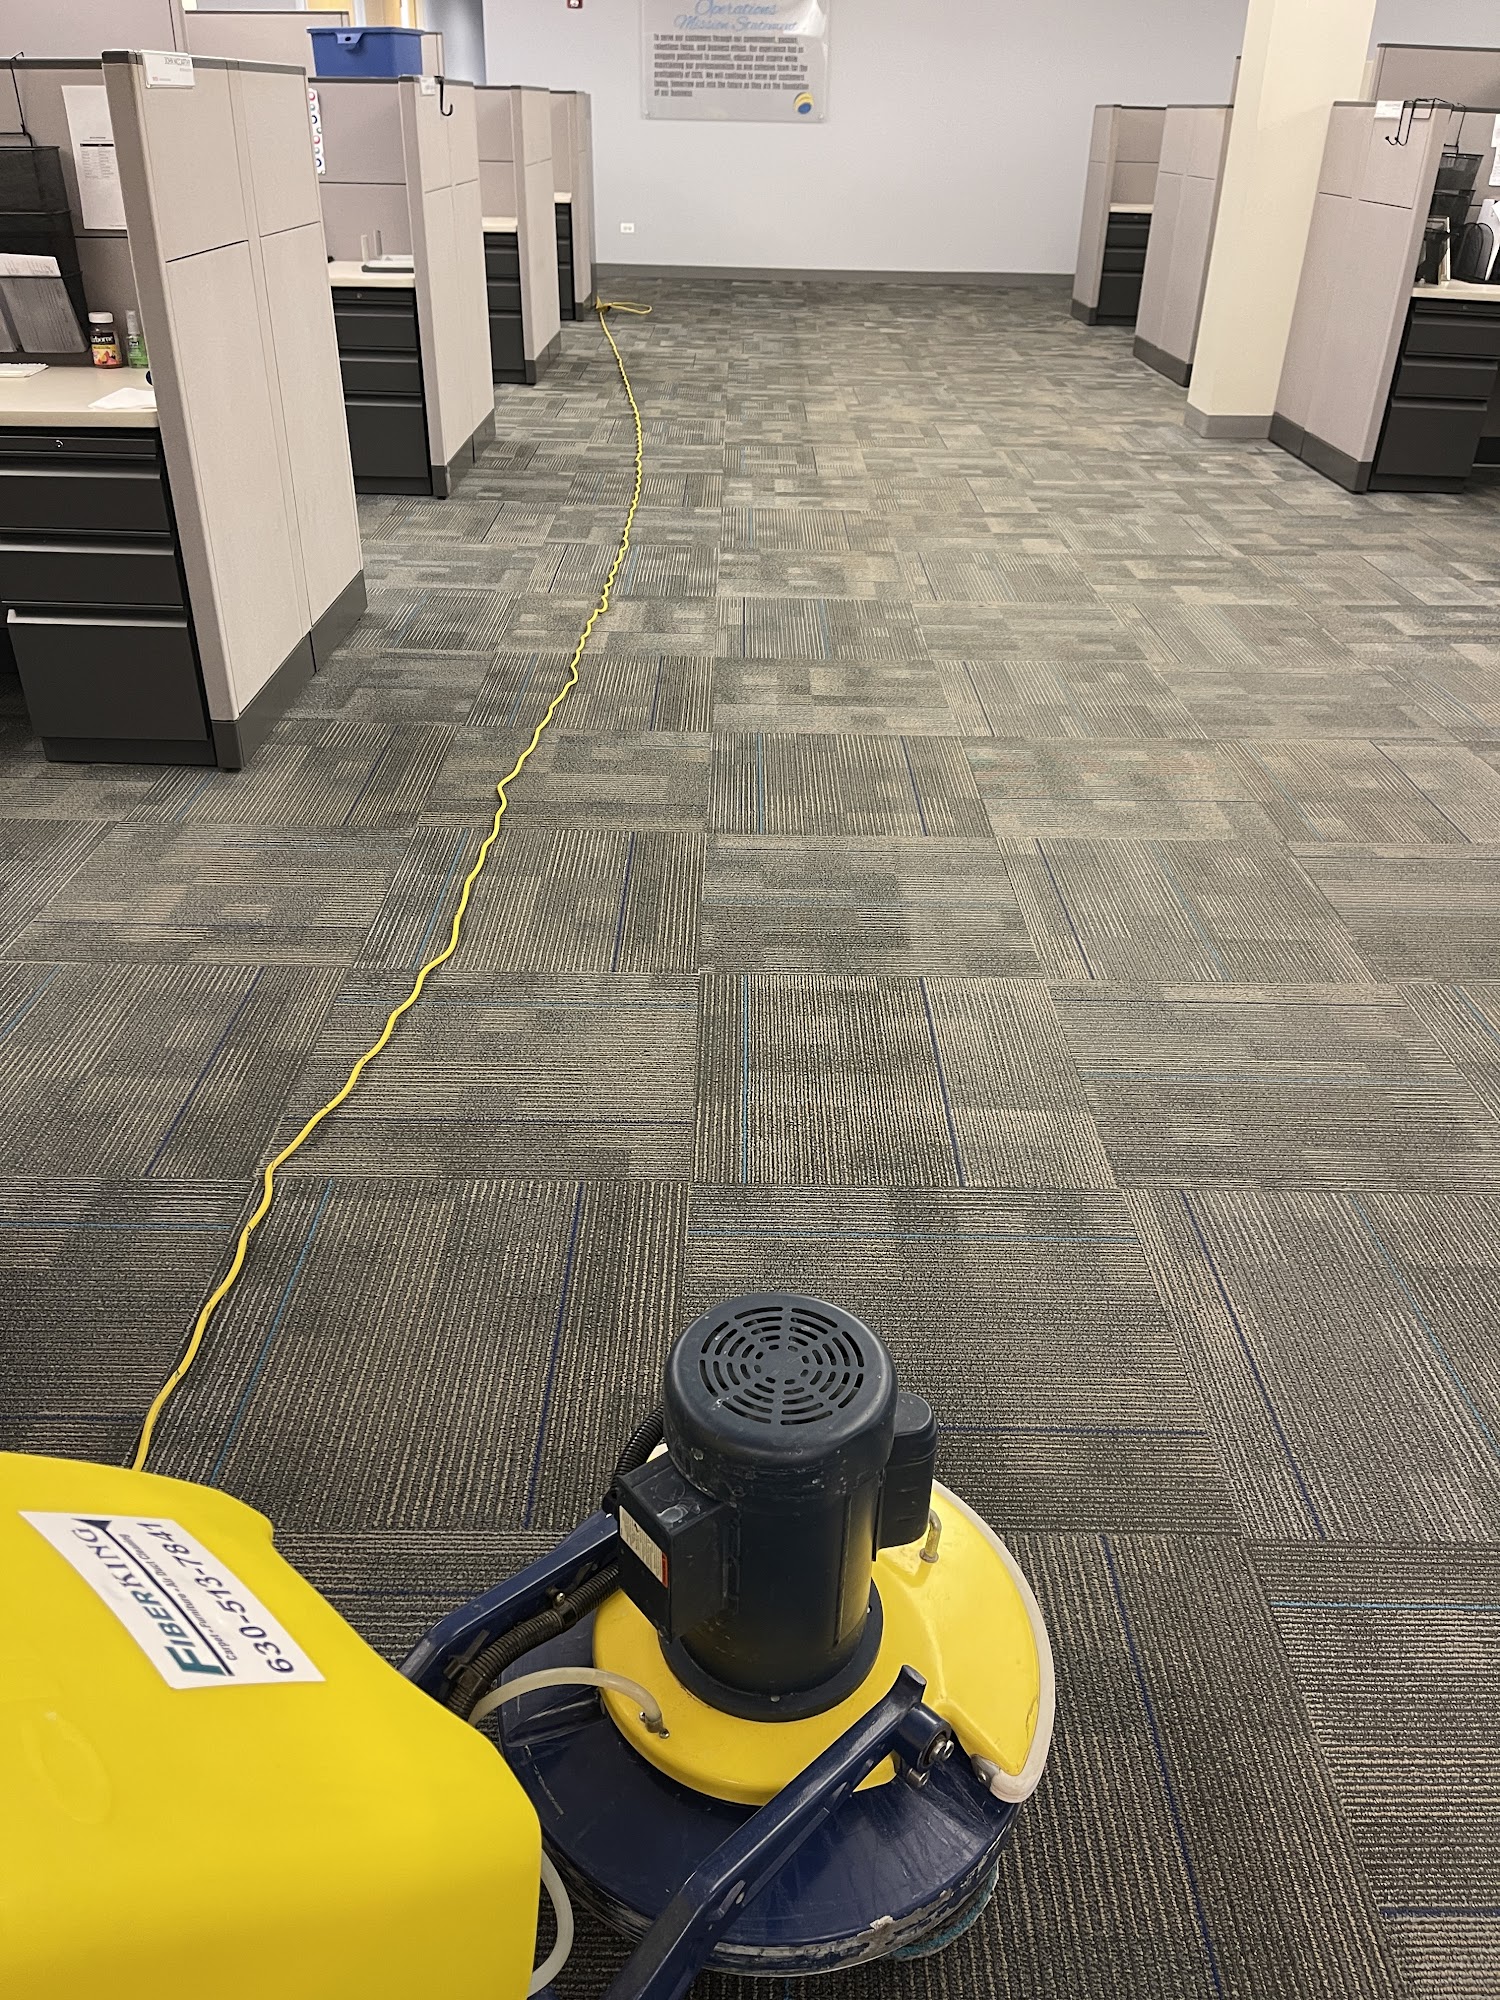 Fiberking commercial and residential carpet, floor and air duct cleaning specialist.